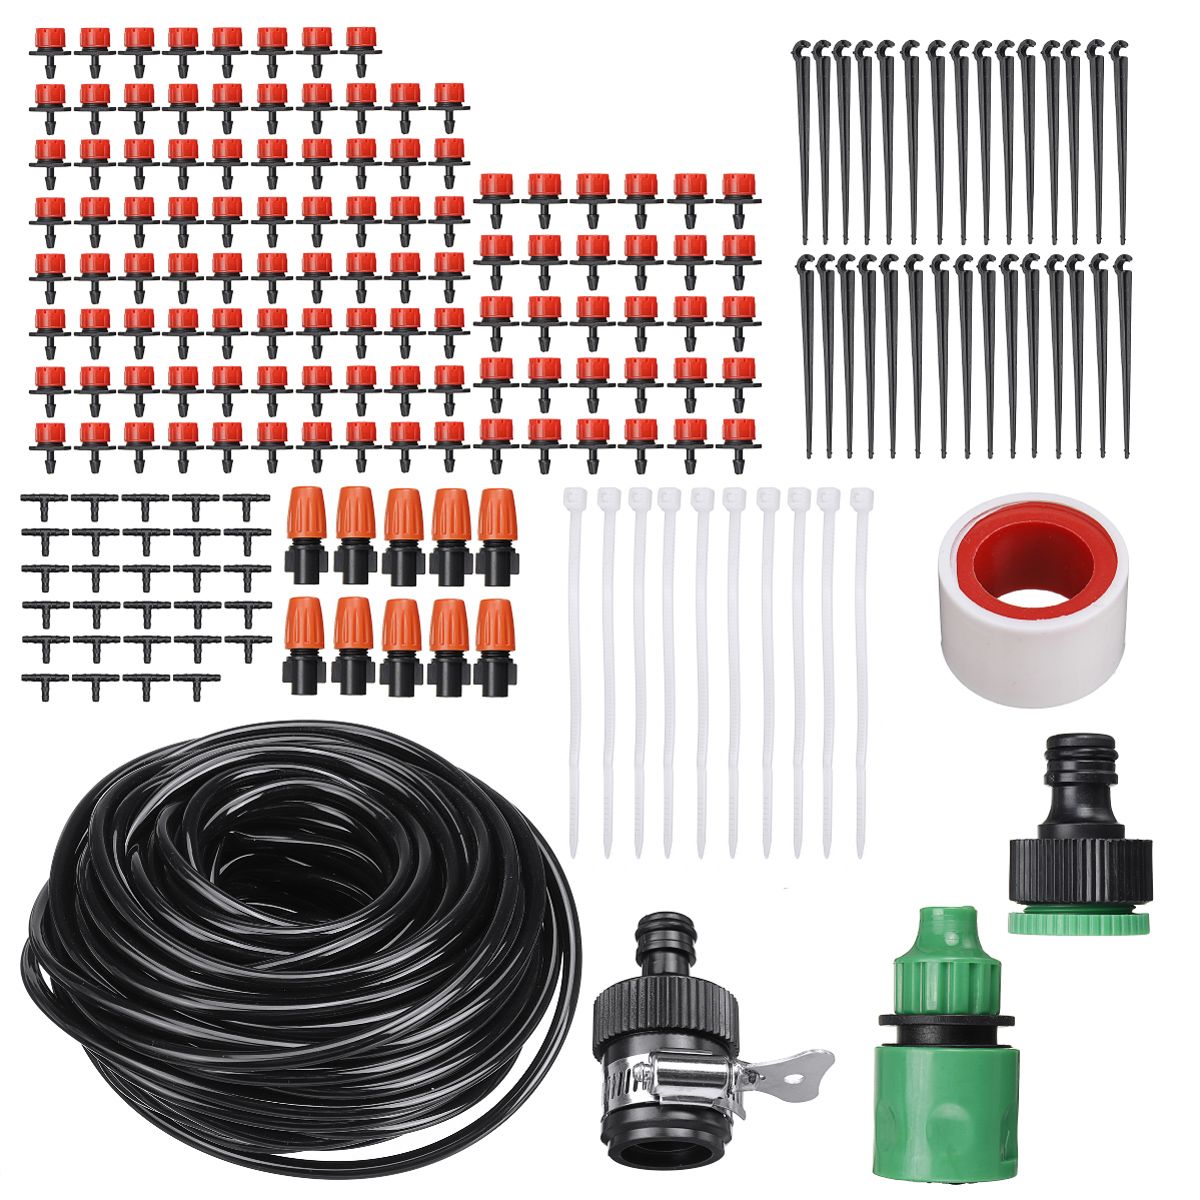 3313391191Pcs-Automatic-Drip-Irrigation-Controller-System-Kit-Micro-Sprinkler-Garden-Watering-1670658